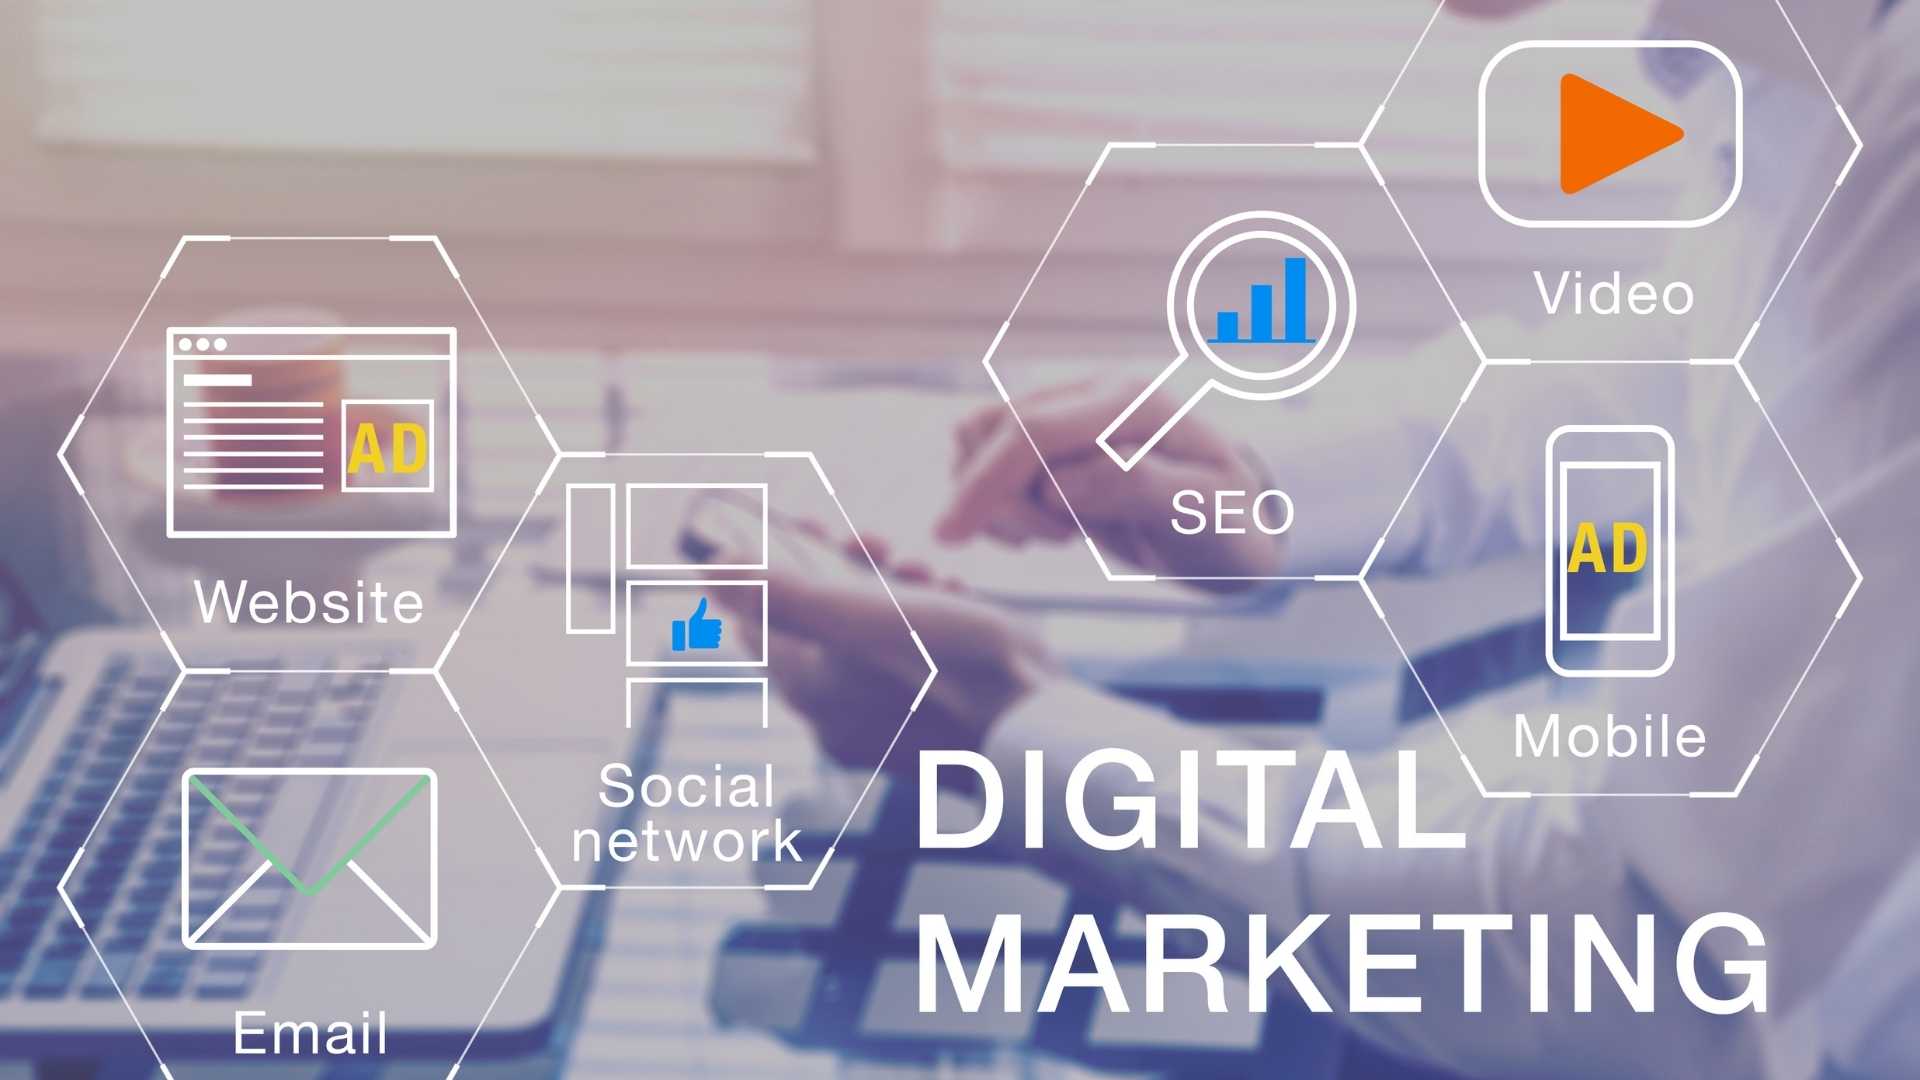 Digital Marketing Real Estate Made Easy and Effective by Geonet